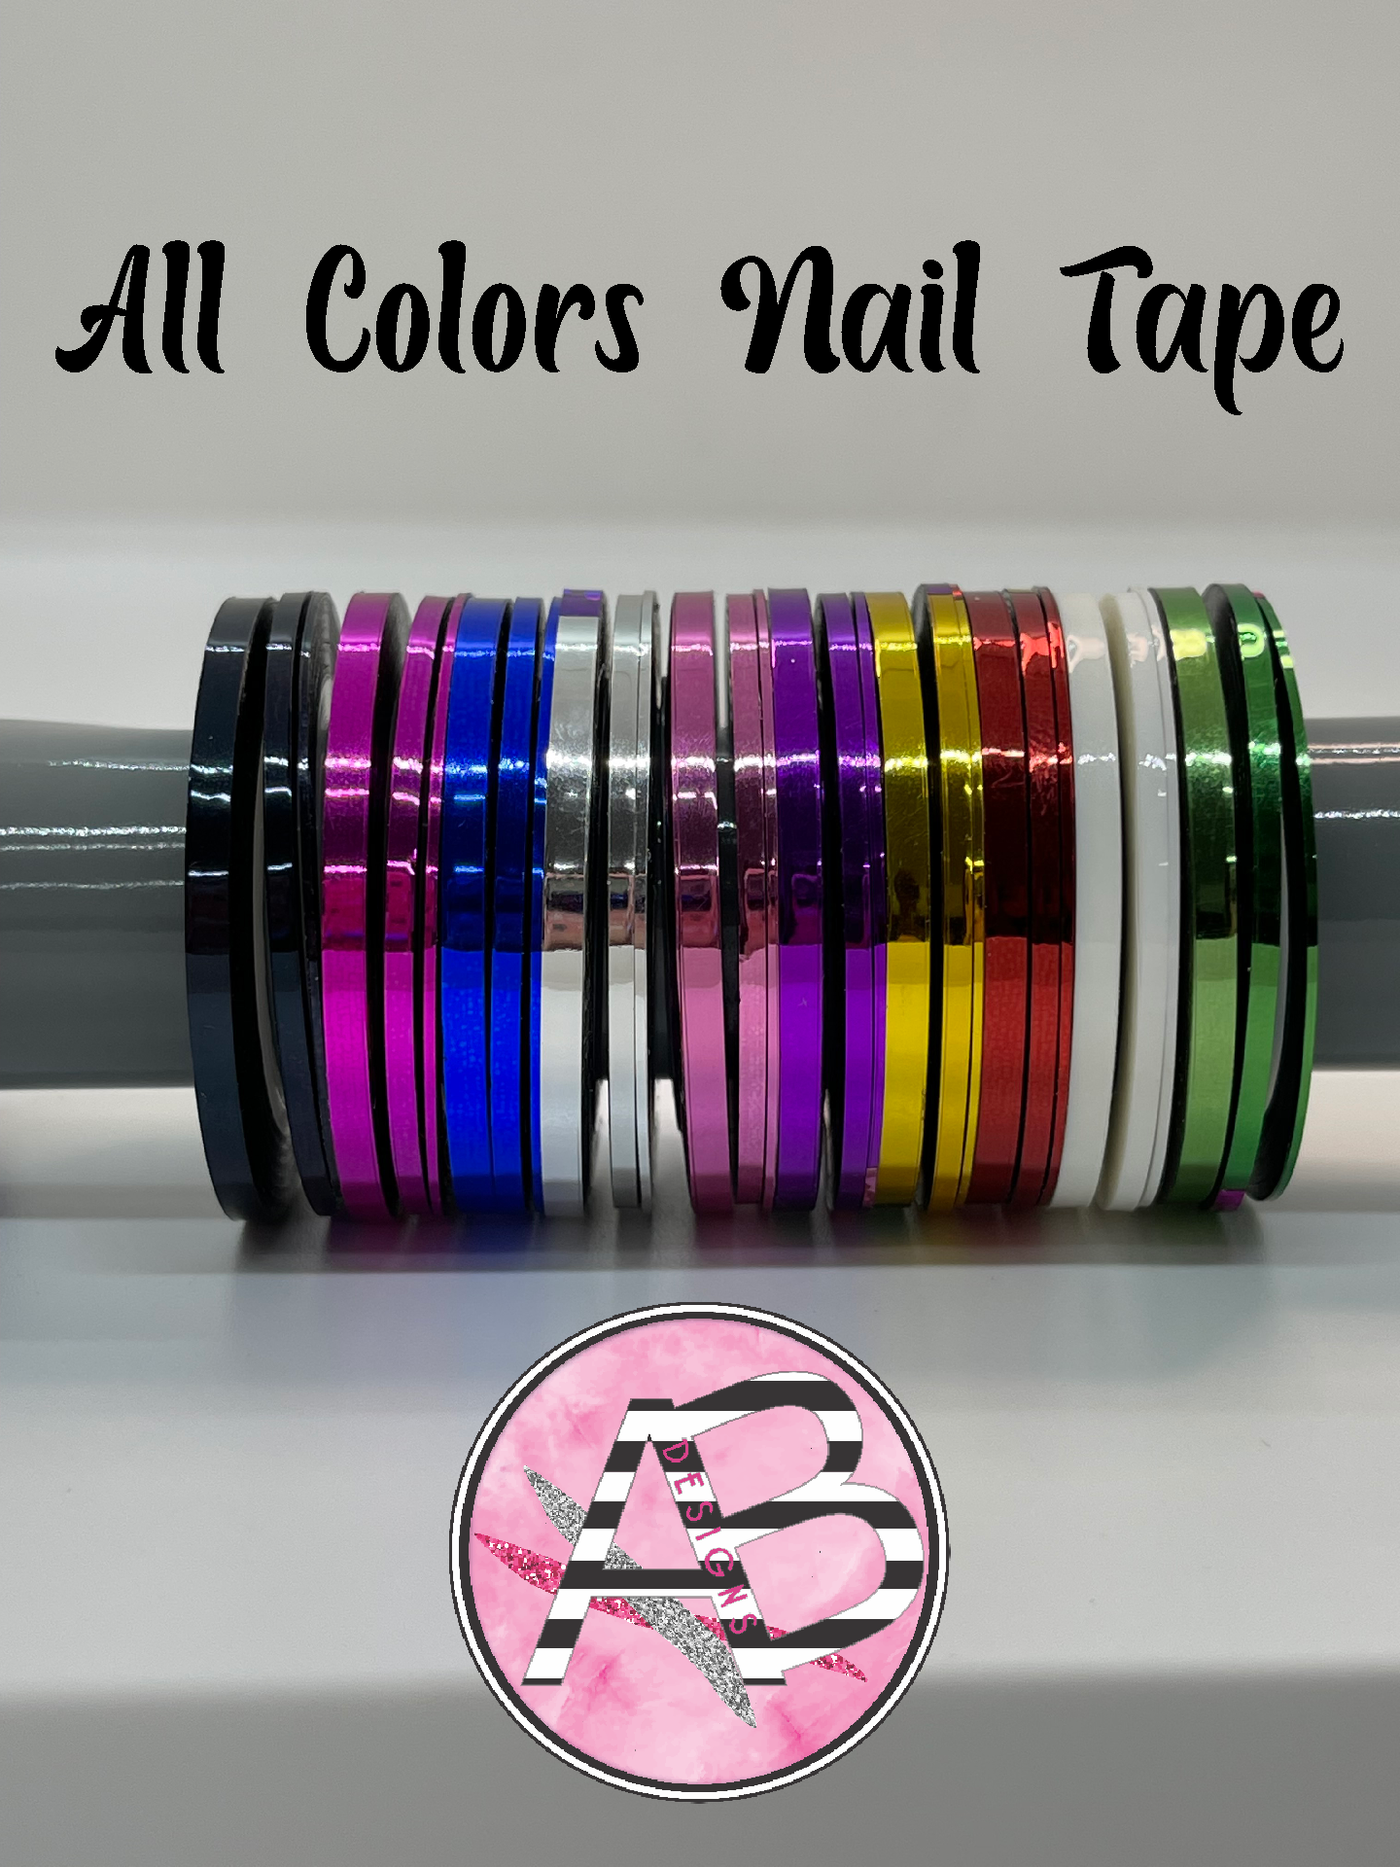 All Colors PRIMARY Nail Tape - Striping Tape BUNDLE (10 COLORS)